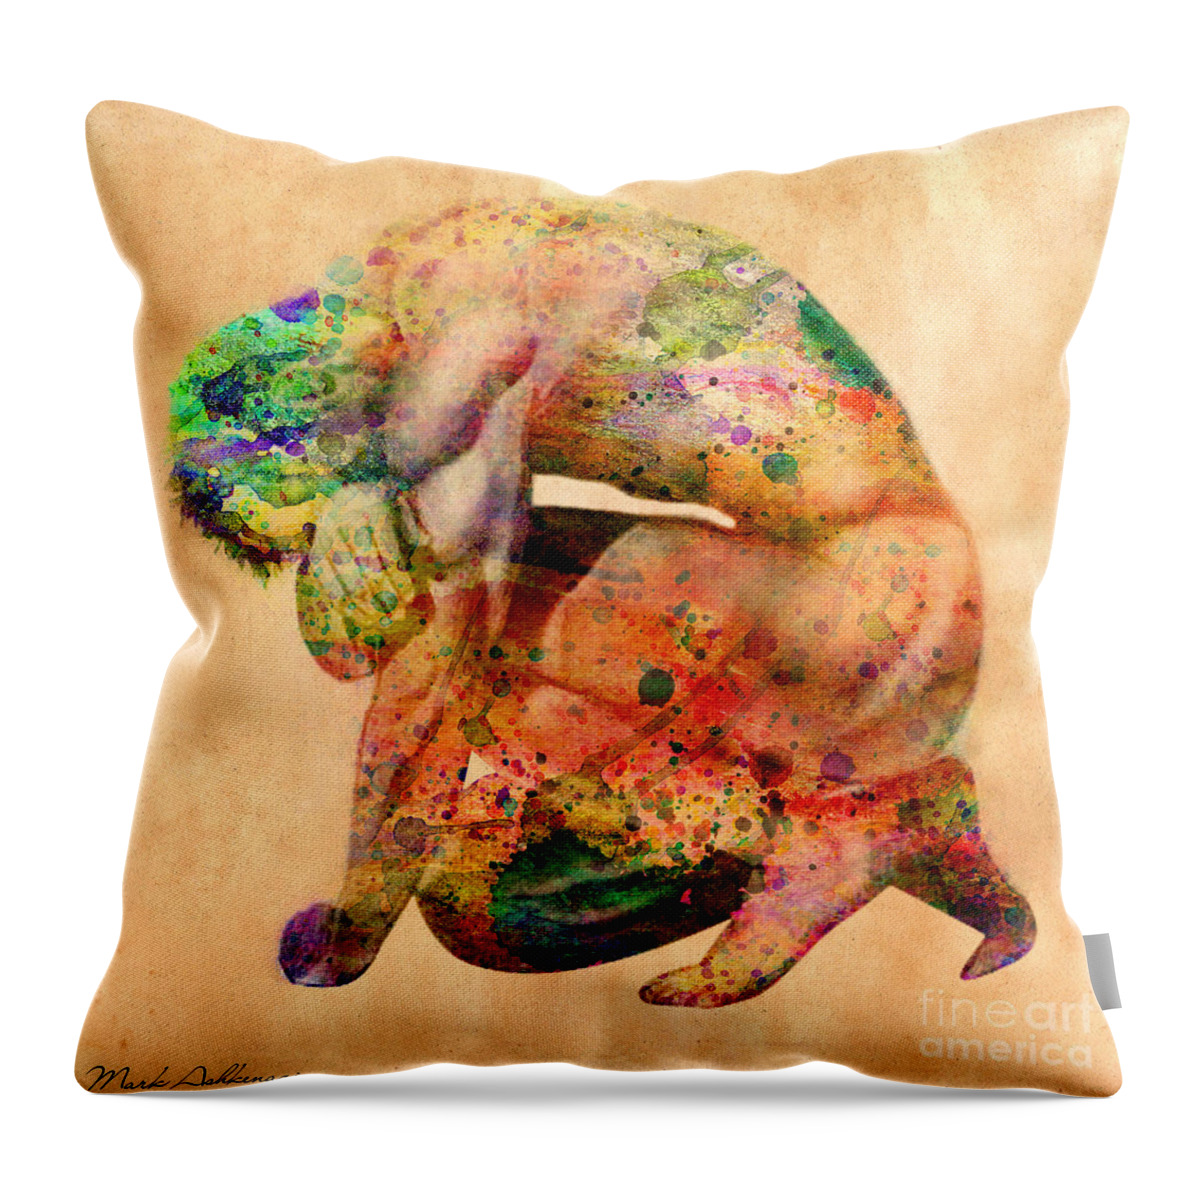 Male Nude Throw Pillow featuring the digital art Hombre Triste by Mark Ashkenazi